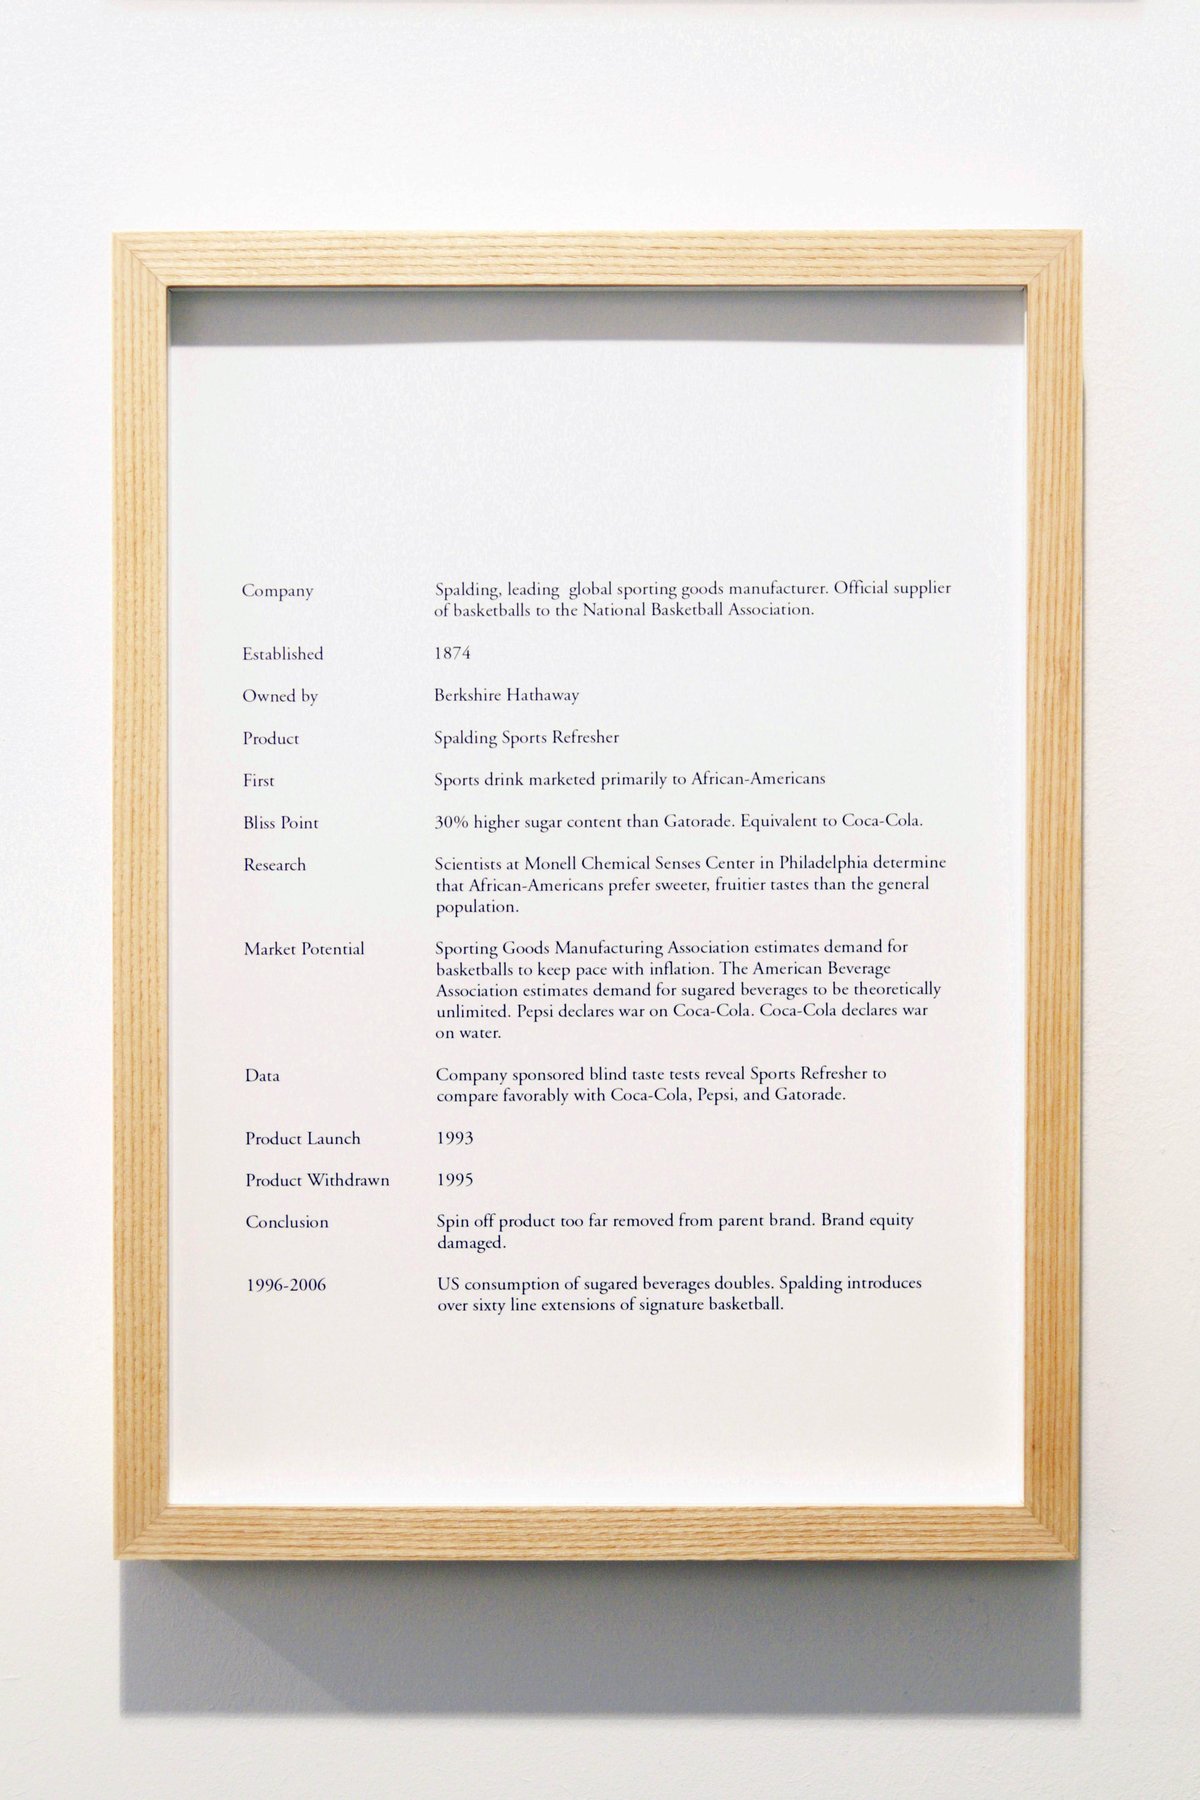 Product Recall: An Index of Innovation. Spalding, 2014-2015 framed texts, photographs, objects